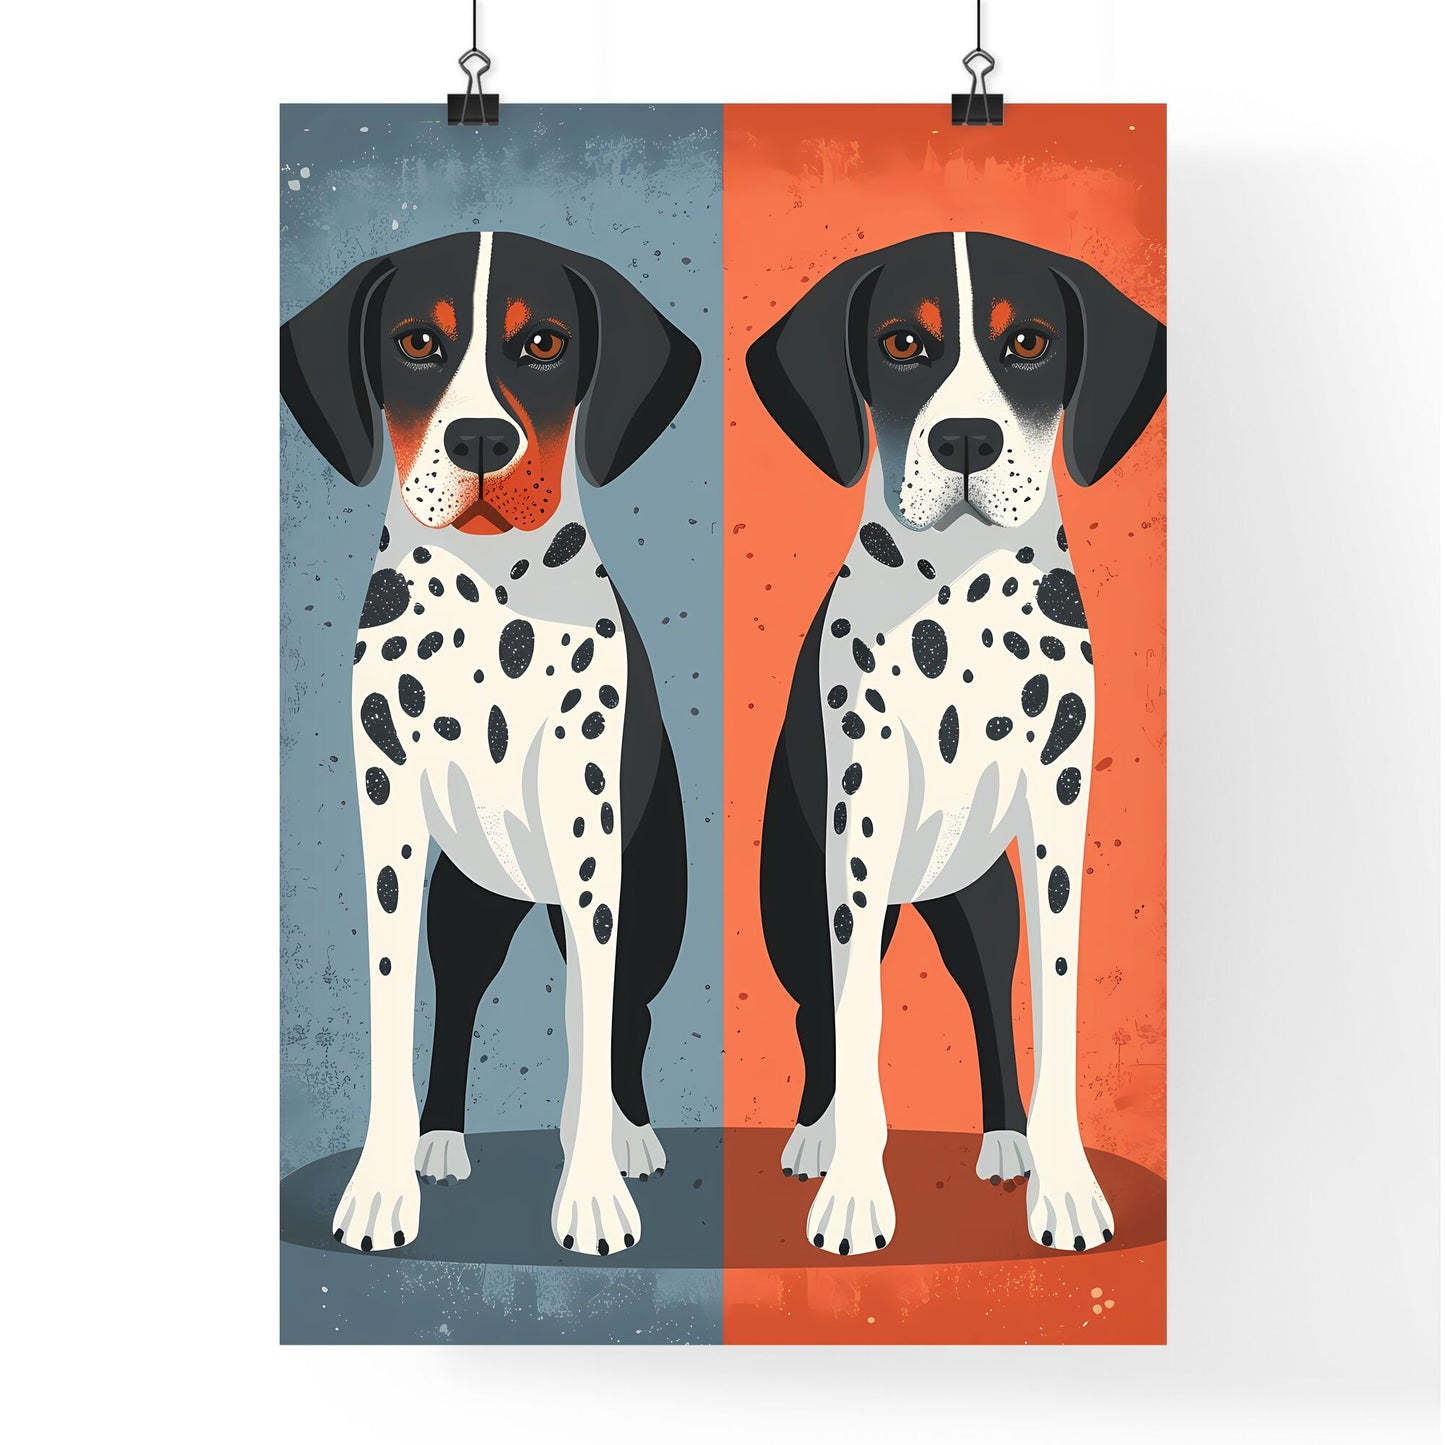 A Poster of two dogs holding each other - A Dog With Black And White Spots Default Title